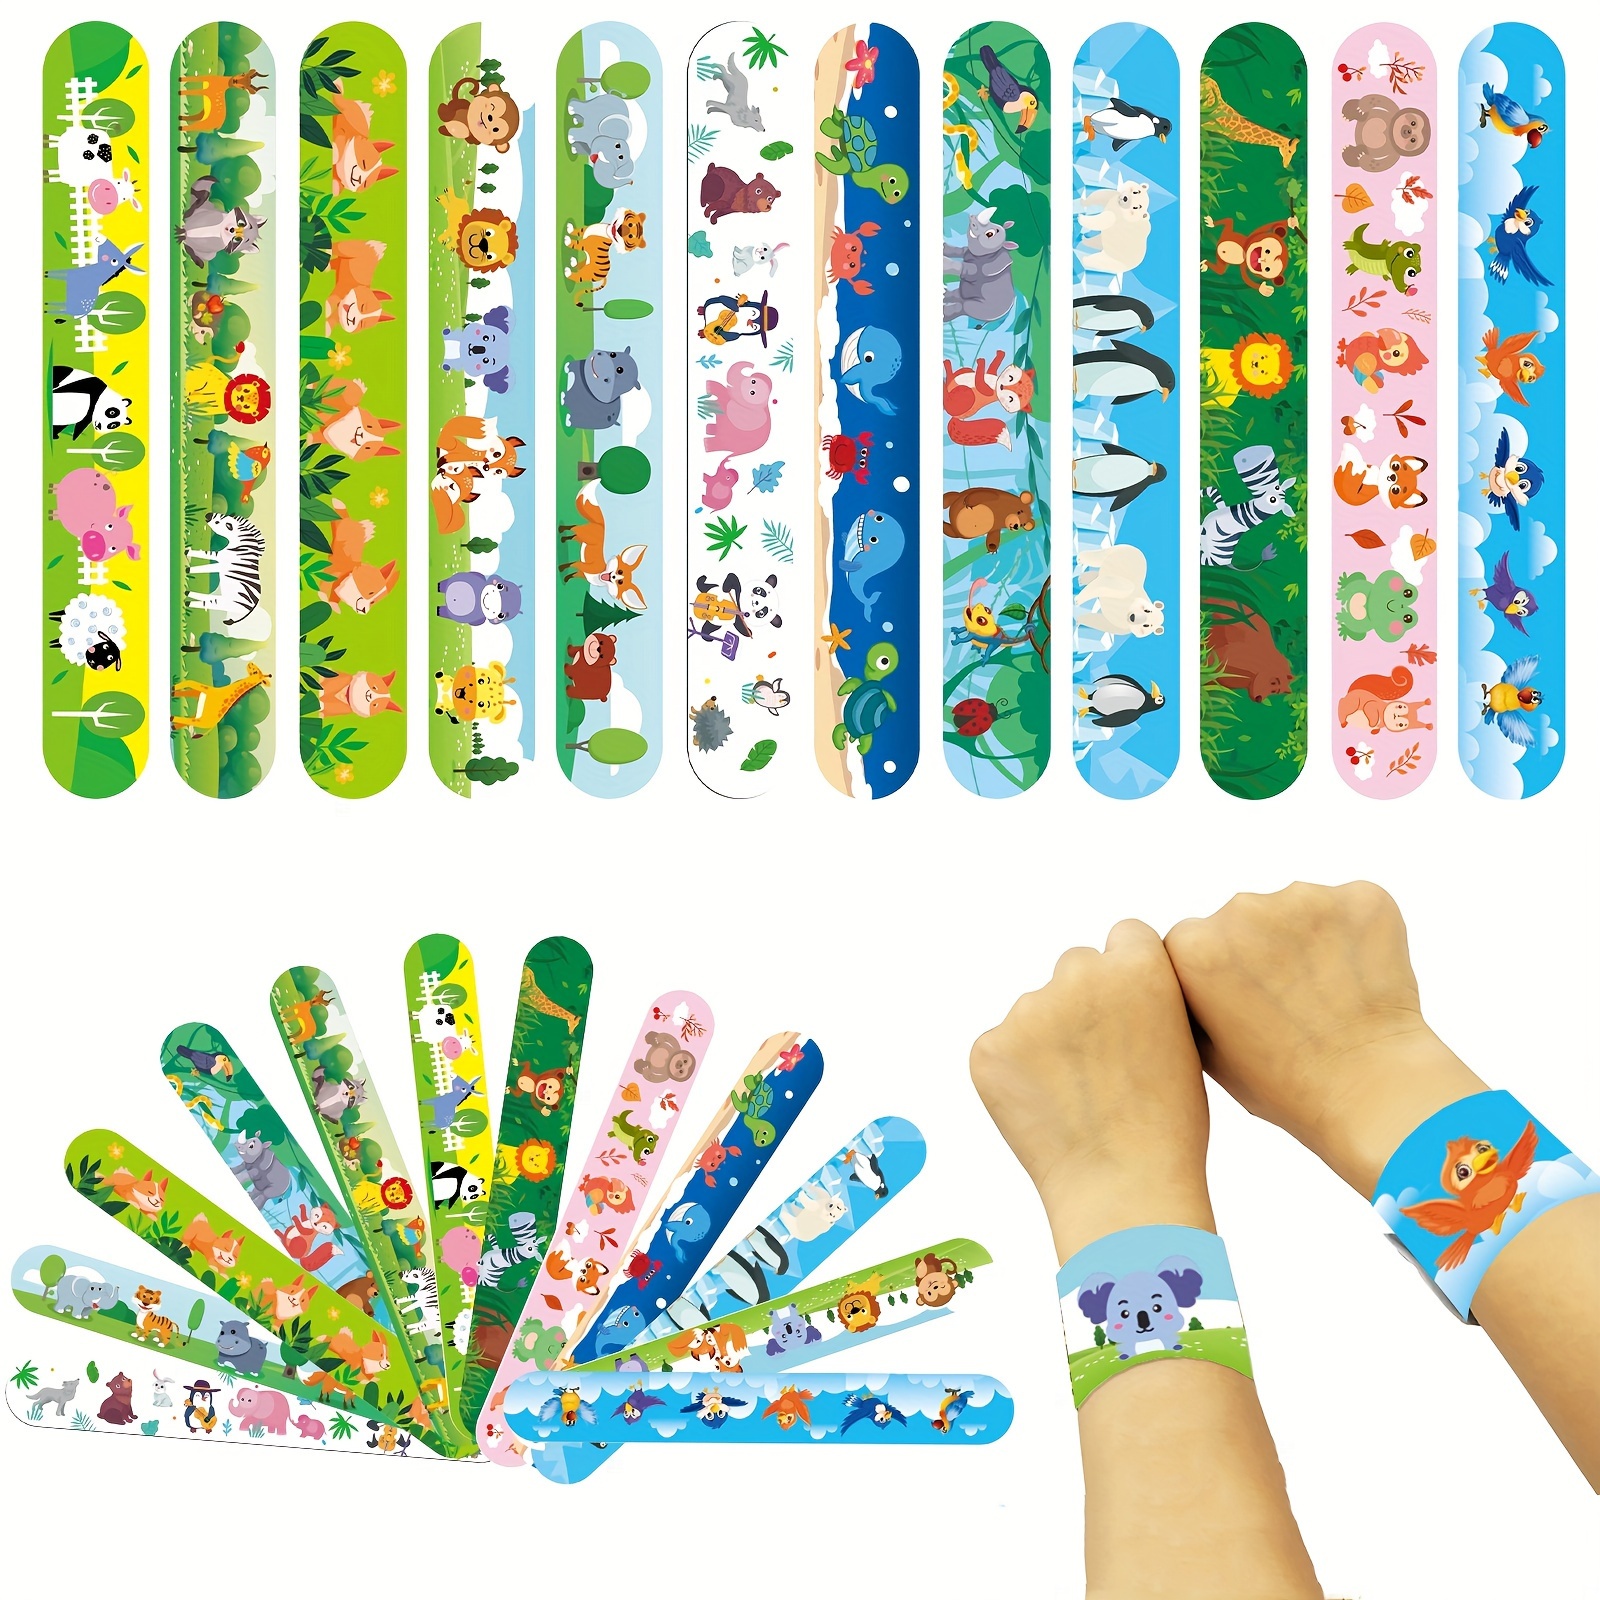 The Cosmic Charm: Galaxy-Themed Slap Bands For Kids